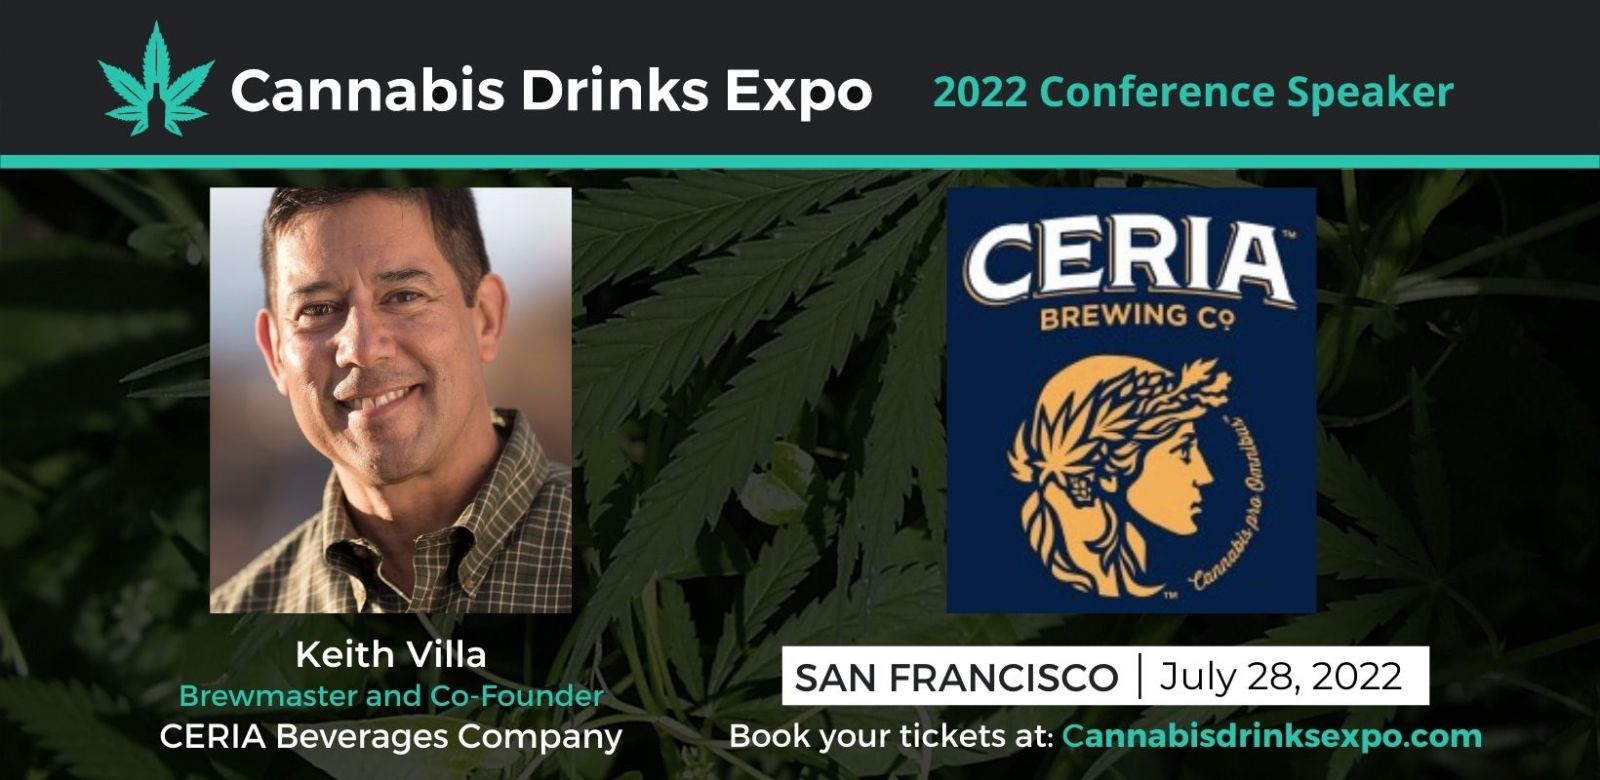 Photo for: Keith Villa, Brewmaster & Co-Founder at CERIA Beverages Company will speak at CDE 2022.